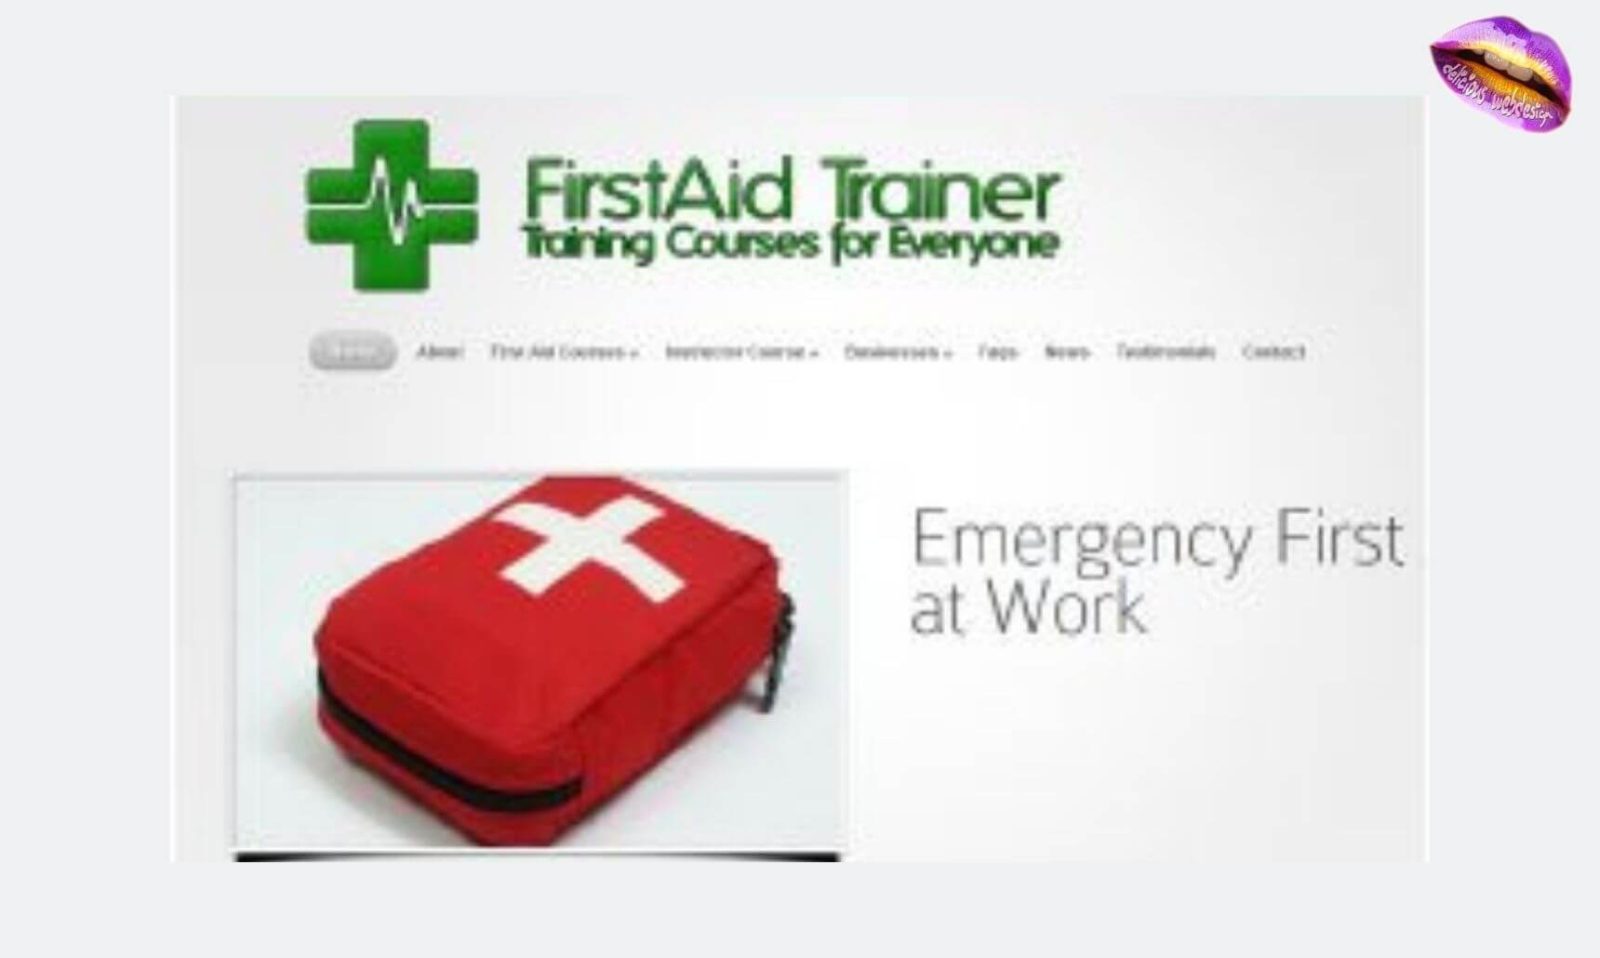 Firstaid Trainer